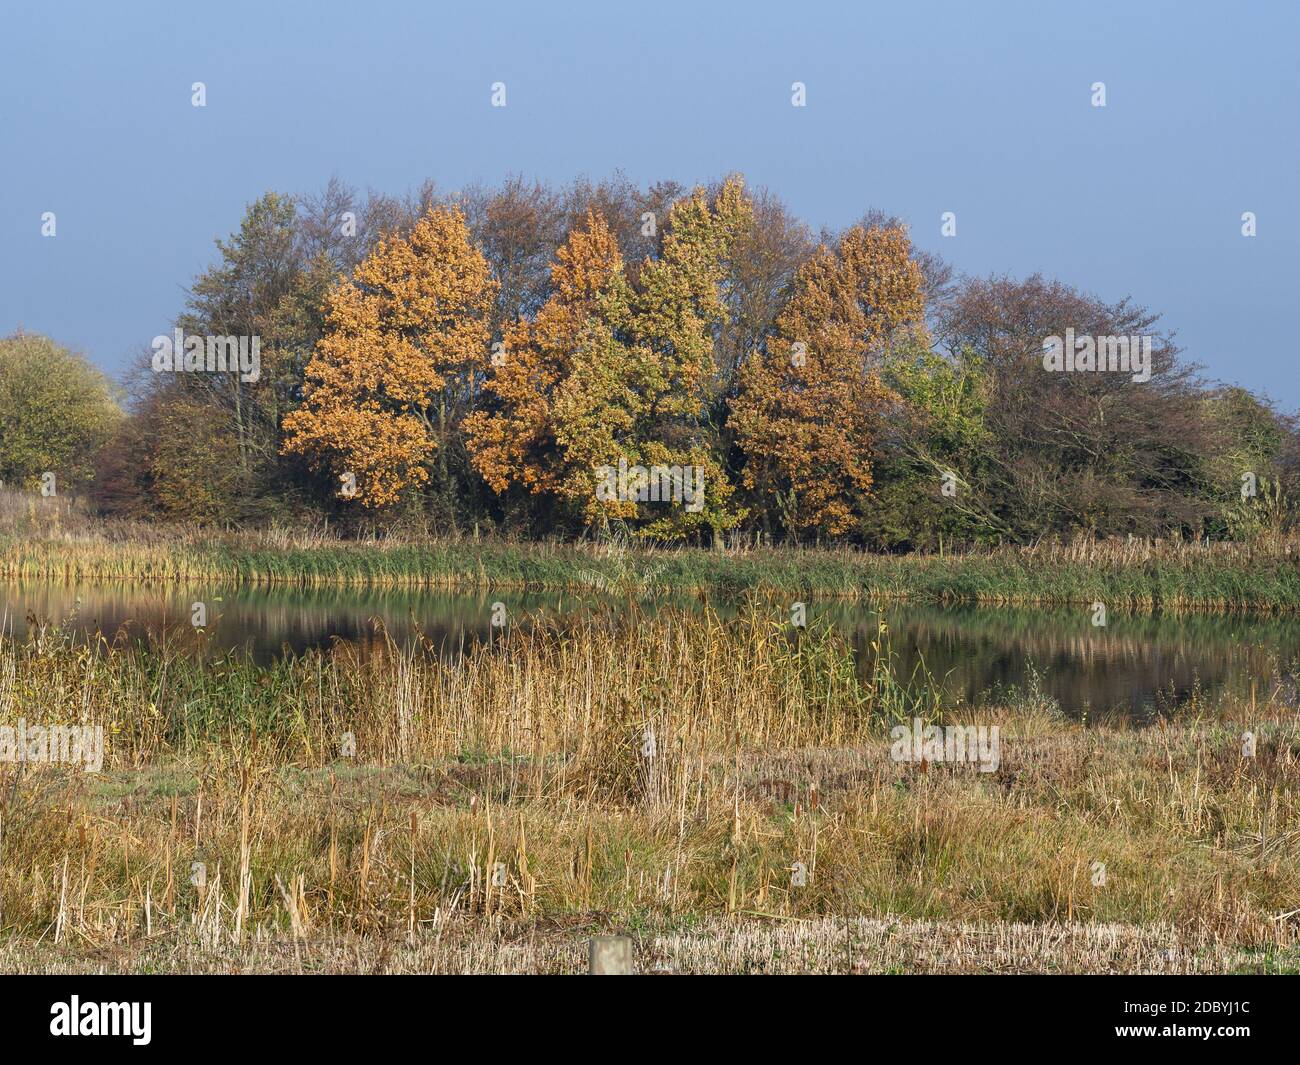 View over wetlands to trees with autumn foliage at Staveley Nature Reserve, North Yorkshire, England Stock Photo